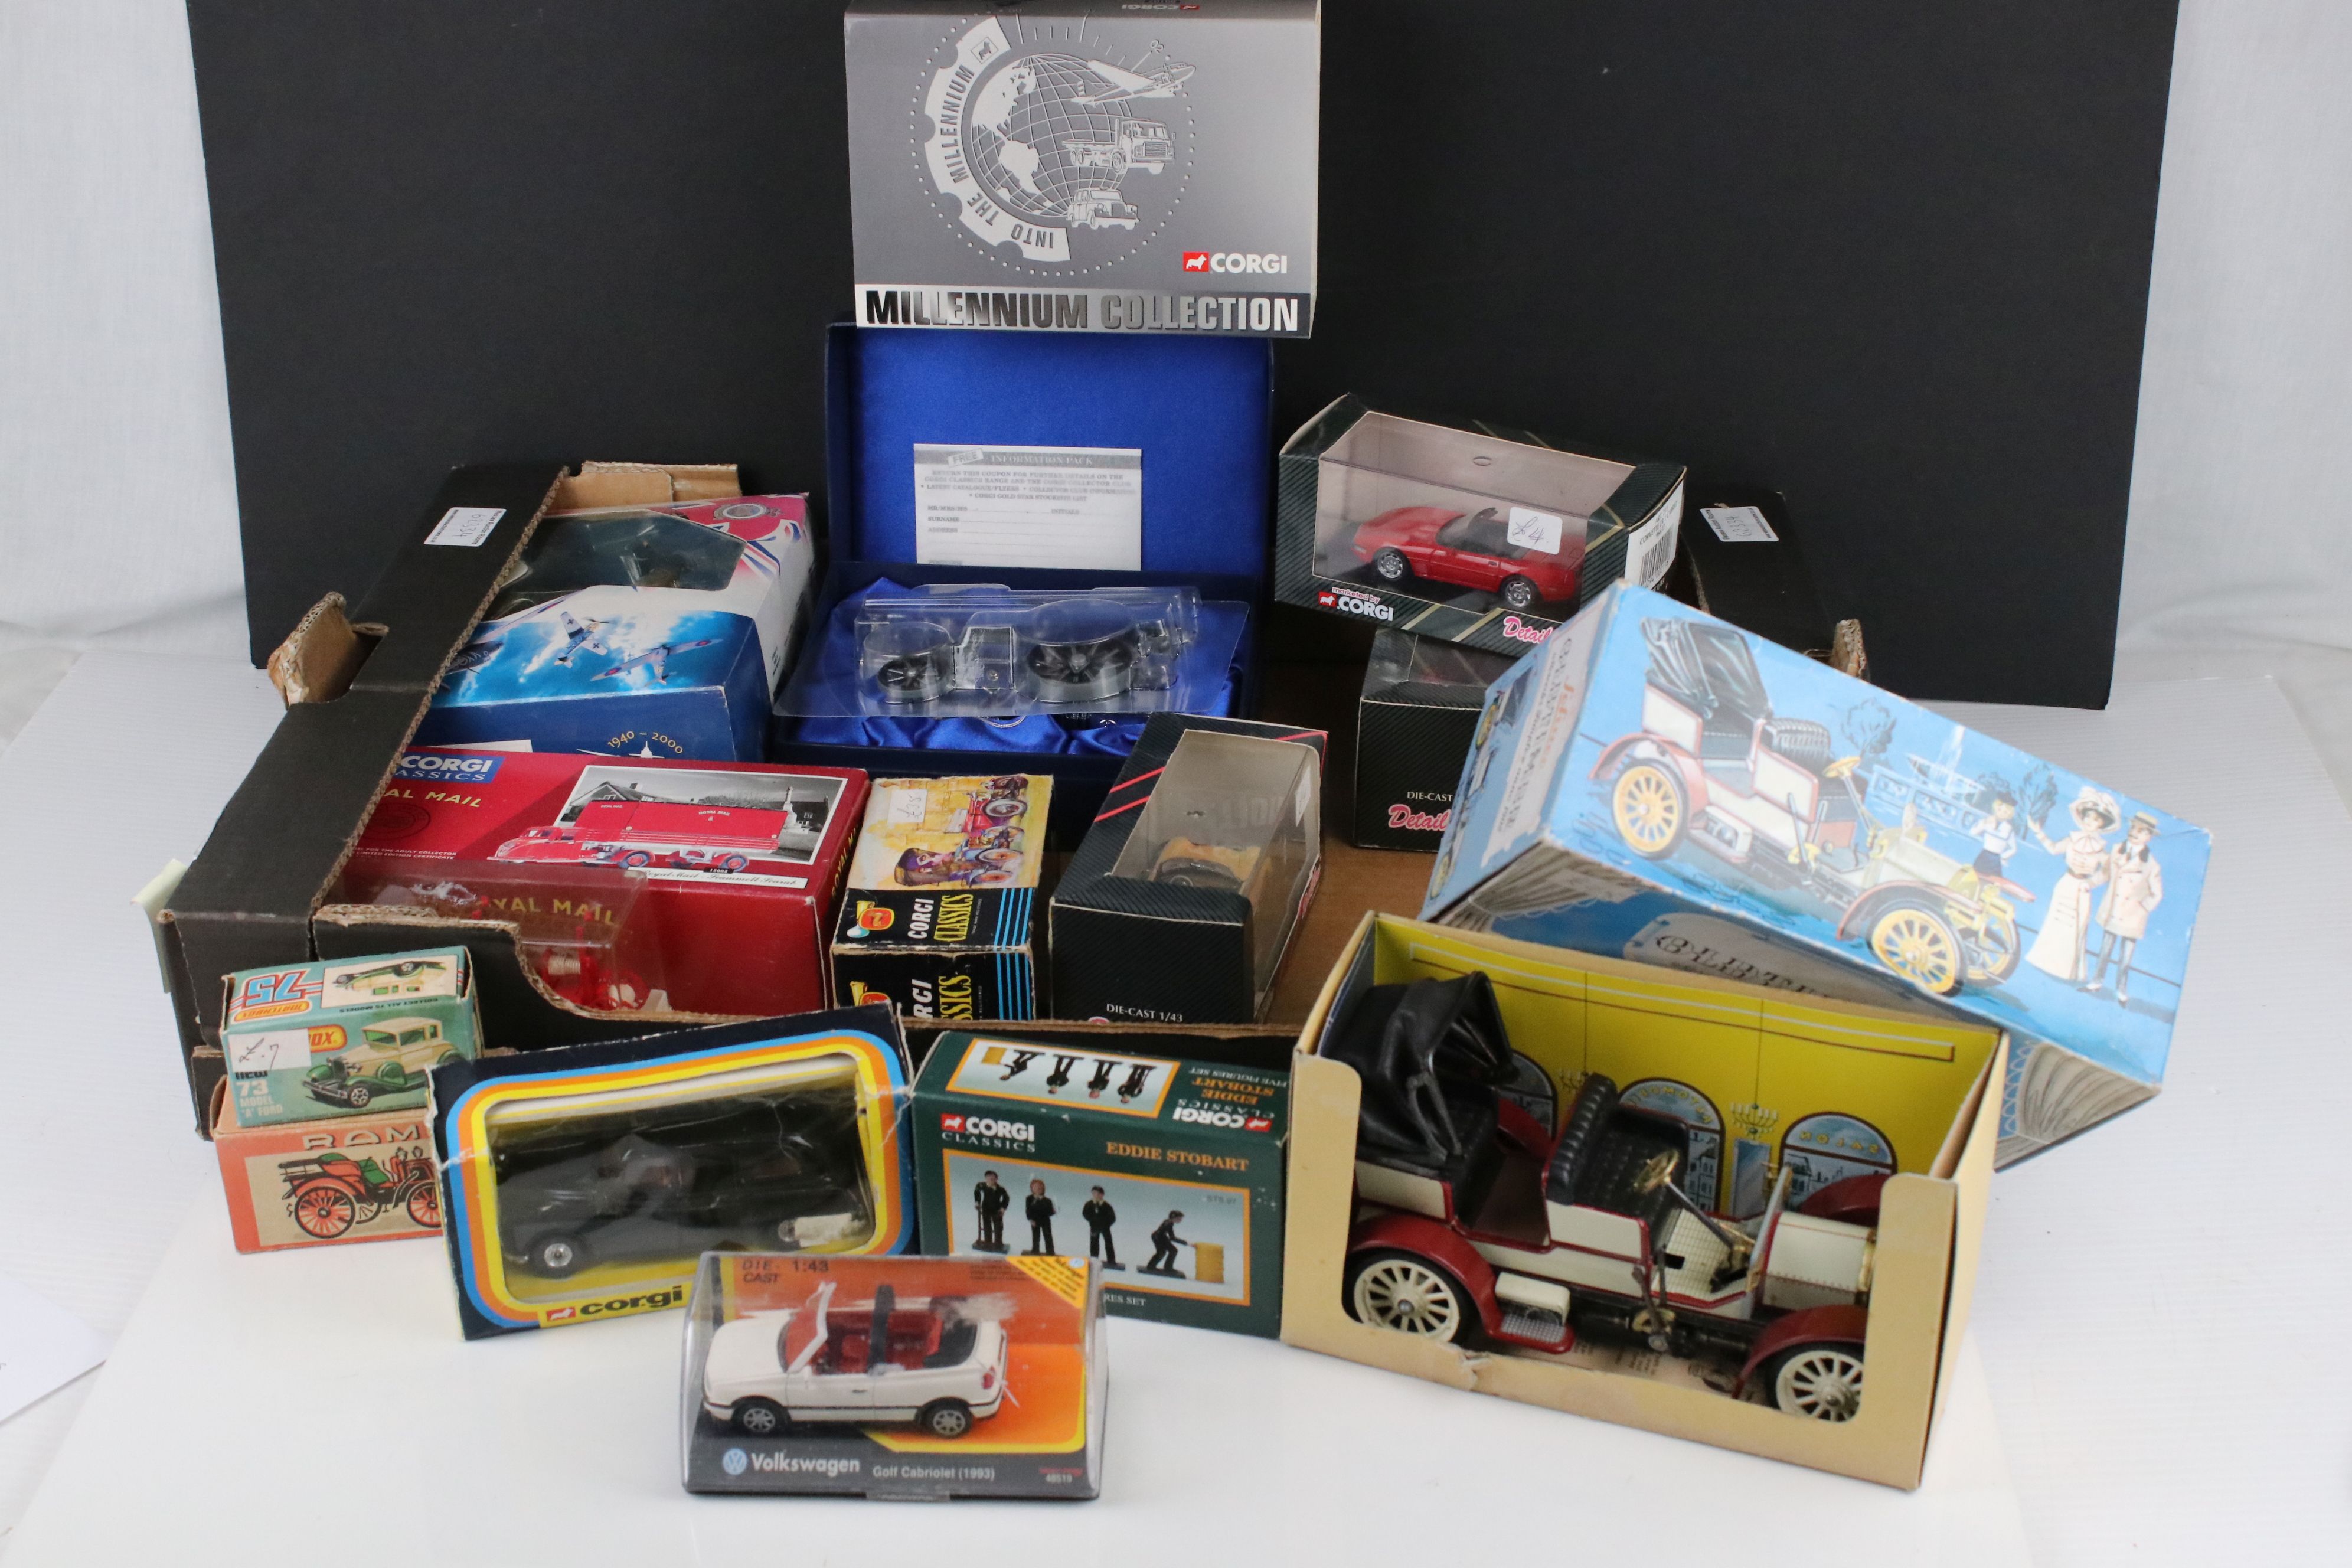 14 Boxed diecast / tin plate models to include Schuco Old Timer 1229, Corgi Millennium Collection